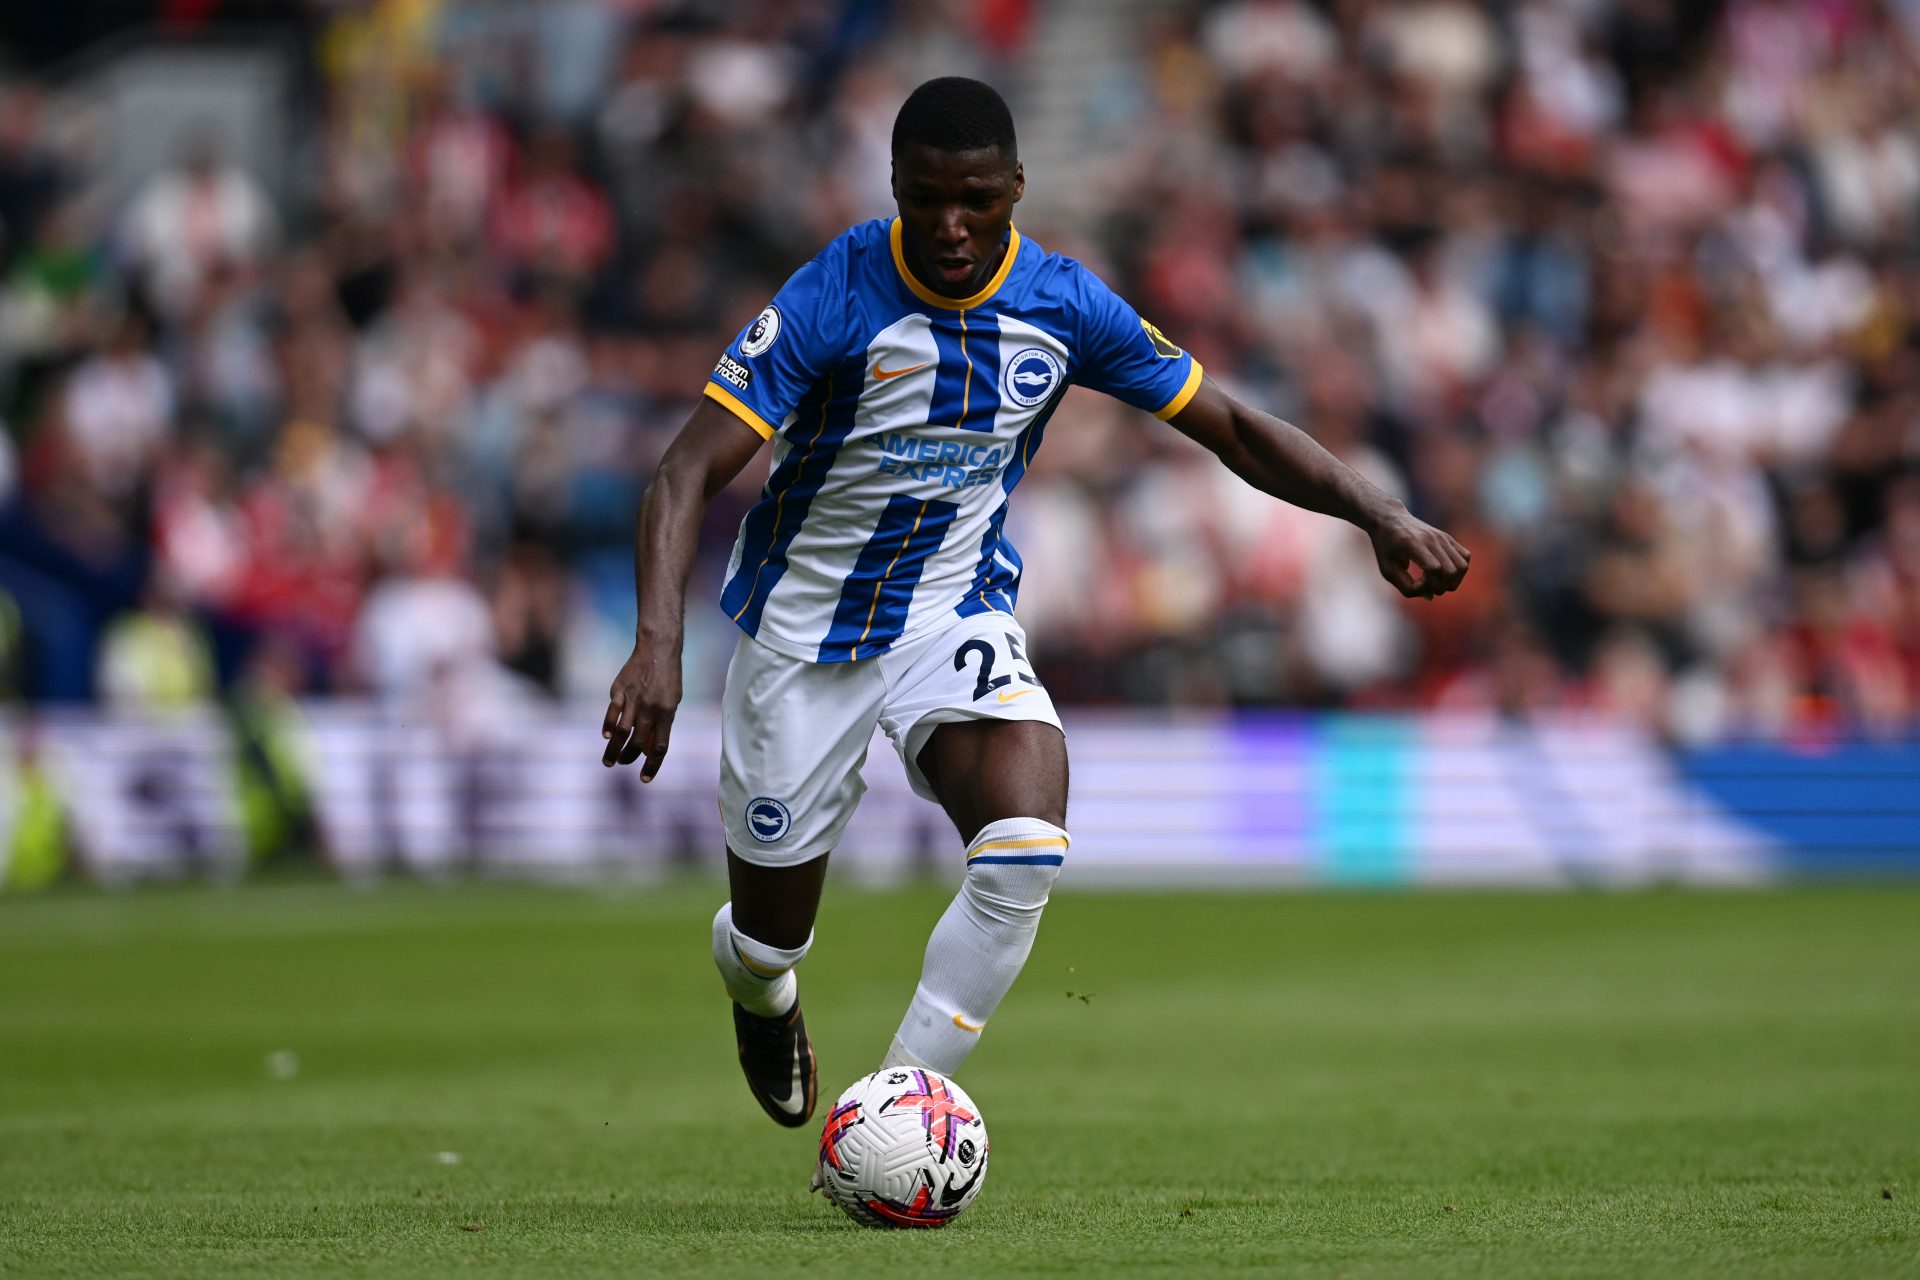 The Moises Caicedo saga finally ends with a £115m record-breaking deal